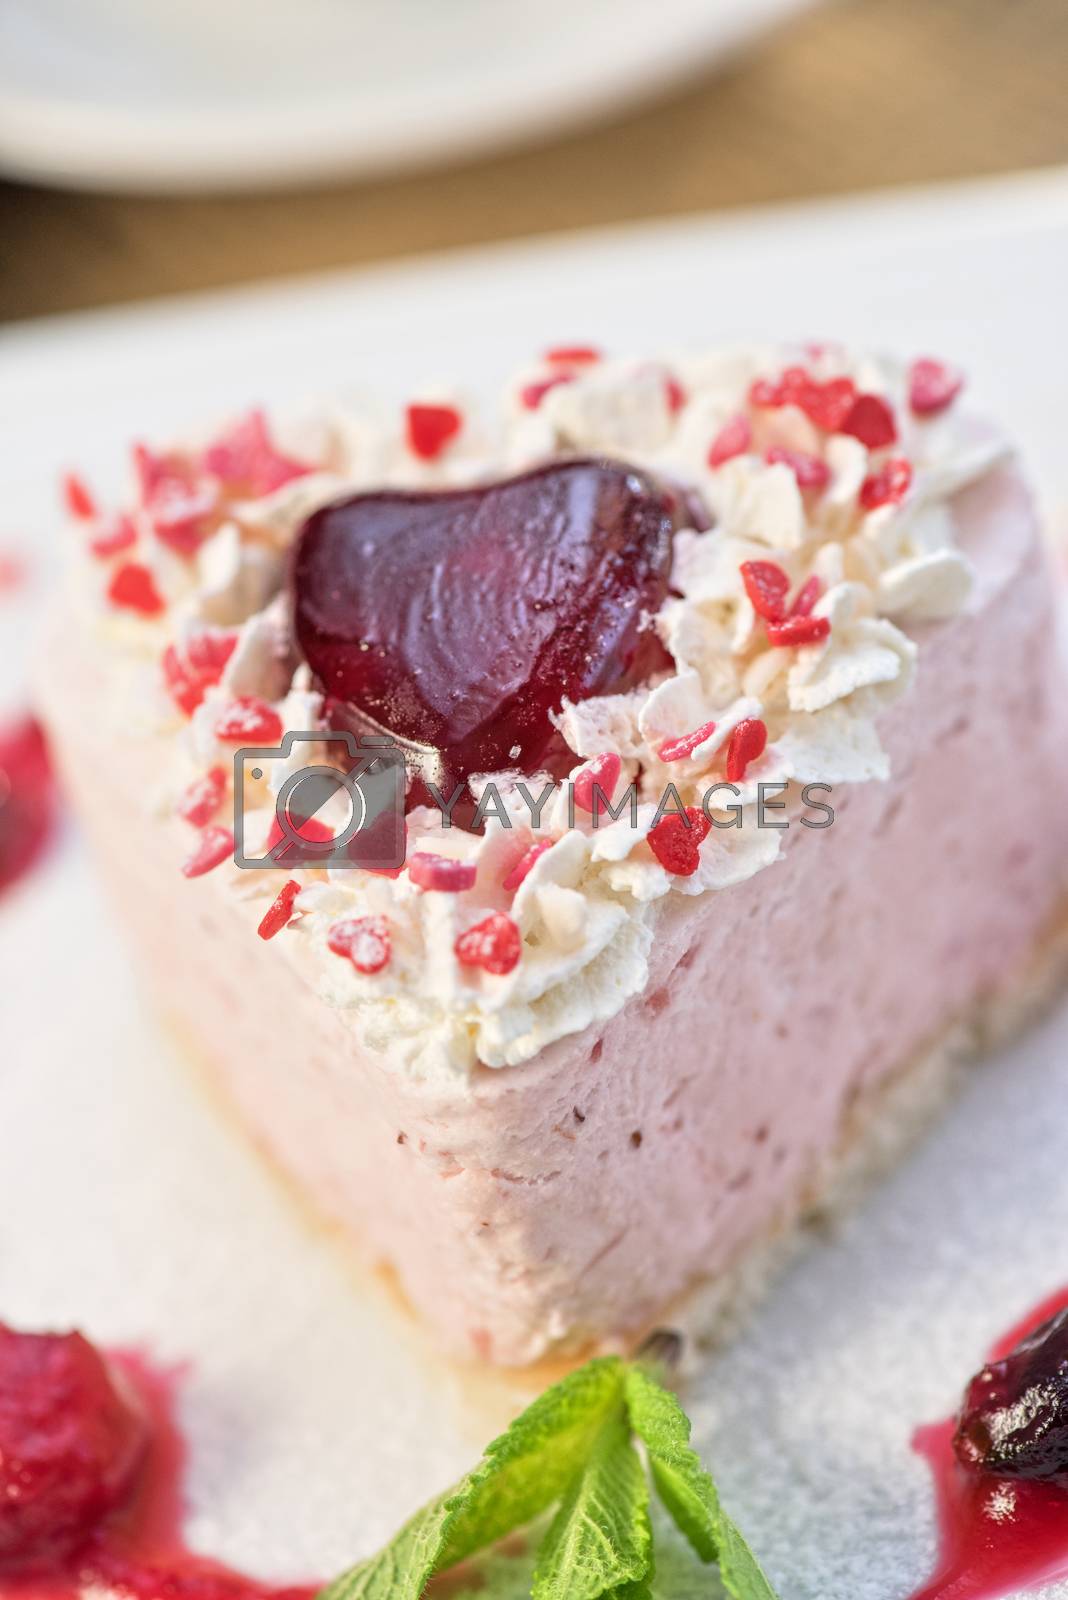 Royalty free image of heart-shaped valentine cake by rusak